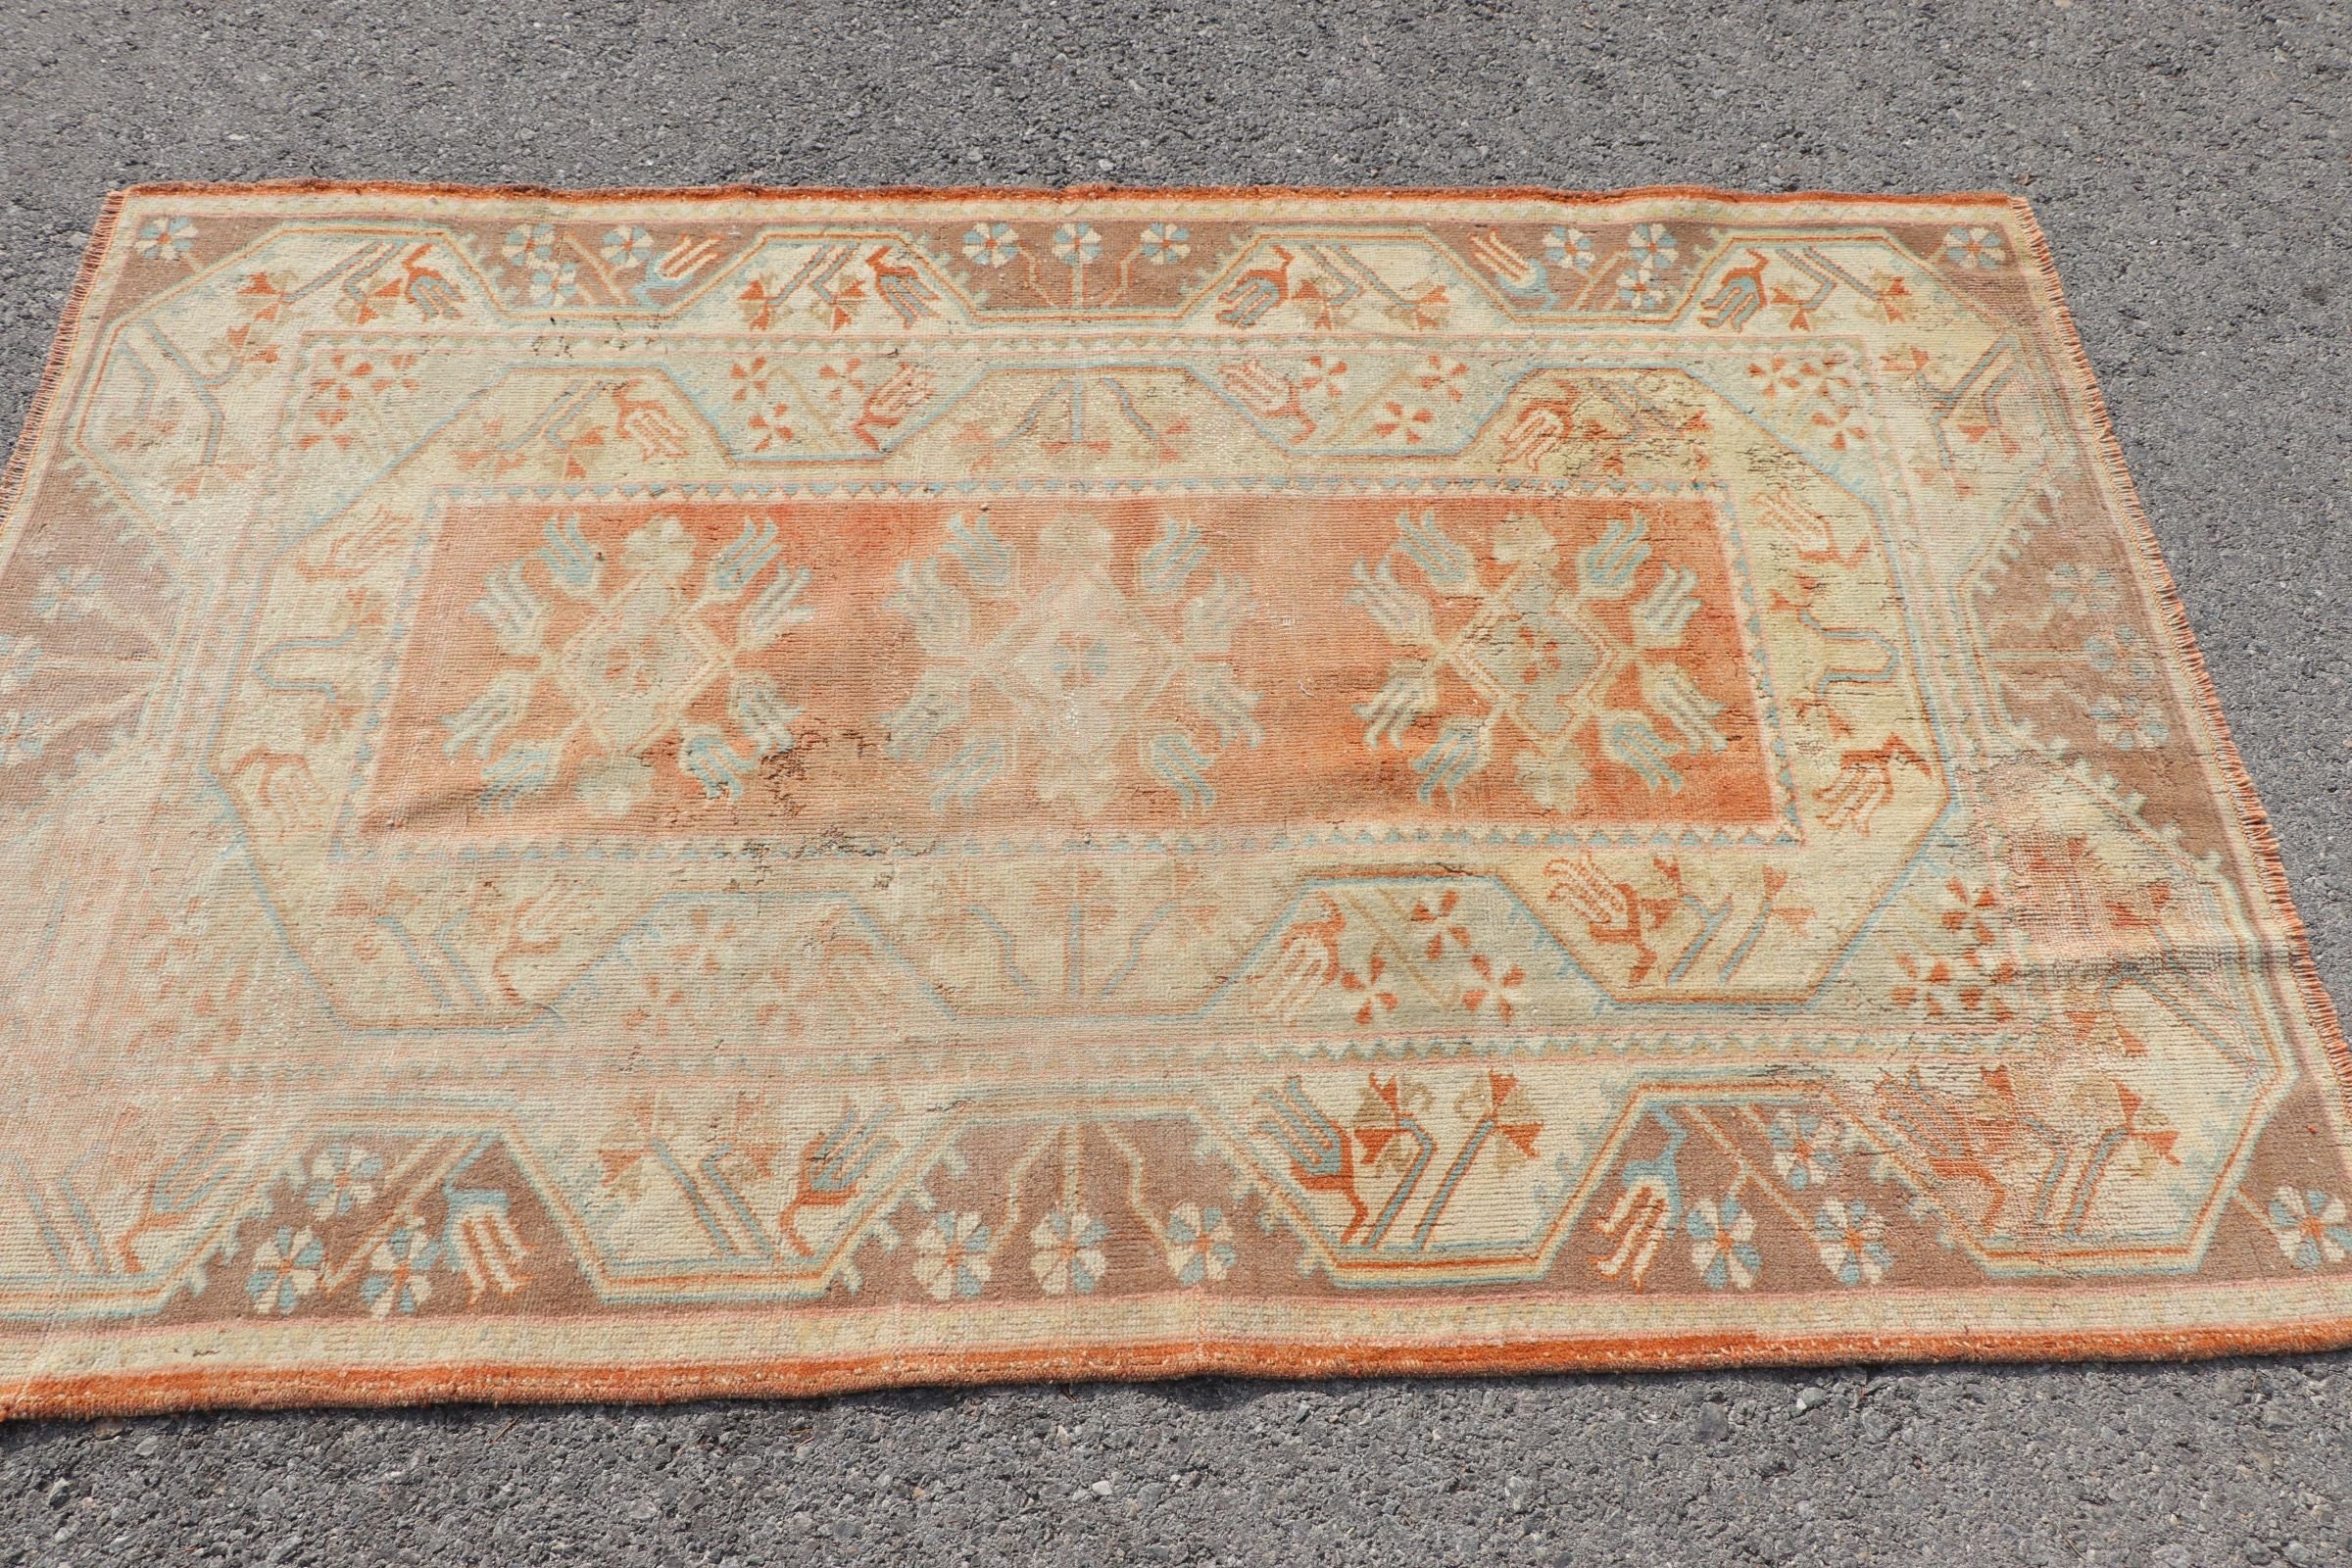 Orange Antique Rug, Anatolian Rug, Entry Rug, Floor Rugs, Turkish Rug, Kitchen Rugs, Vintage Rug, Rugs for Bedroom, 3.8x6 ft Accent Rugs